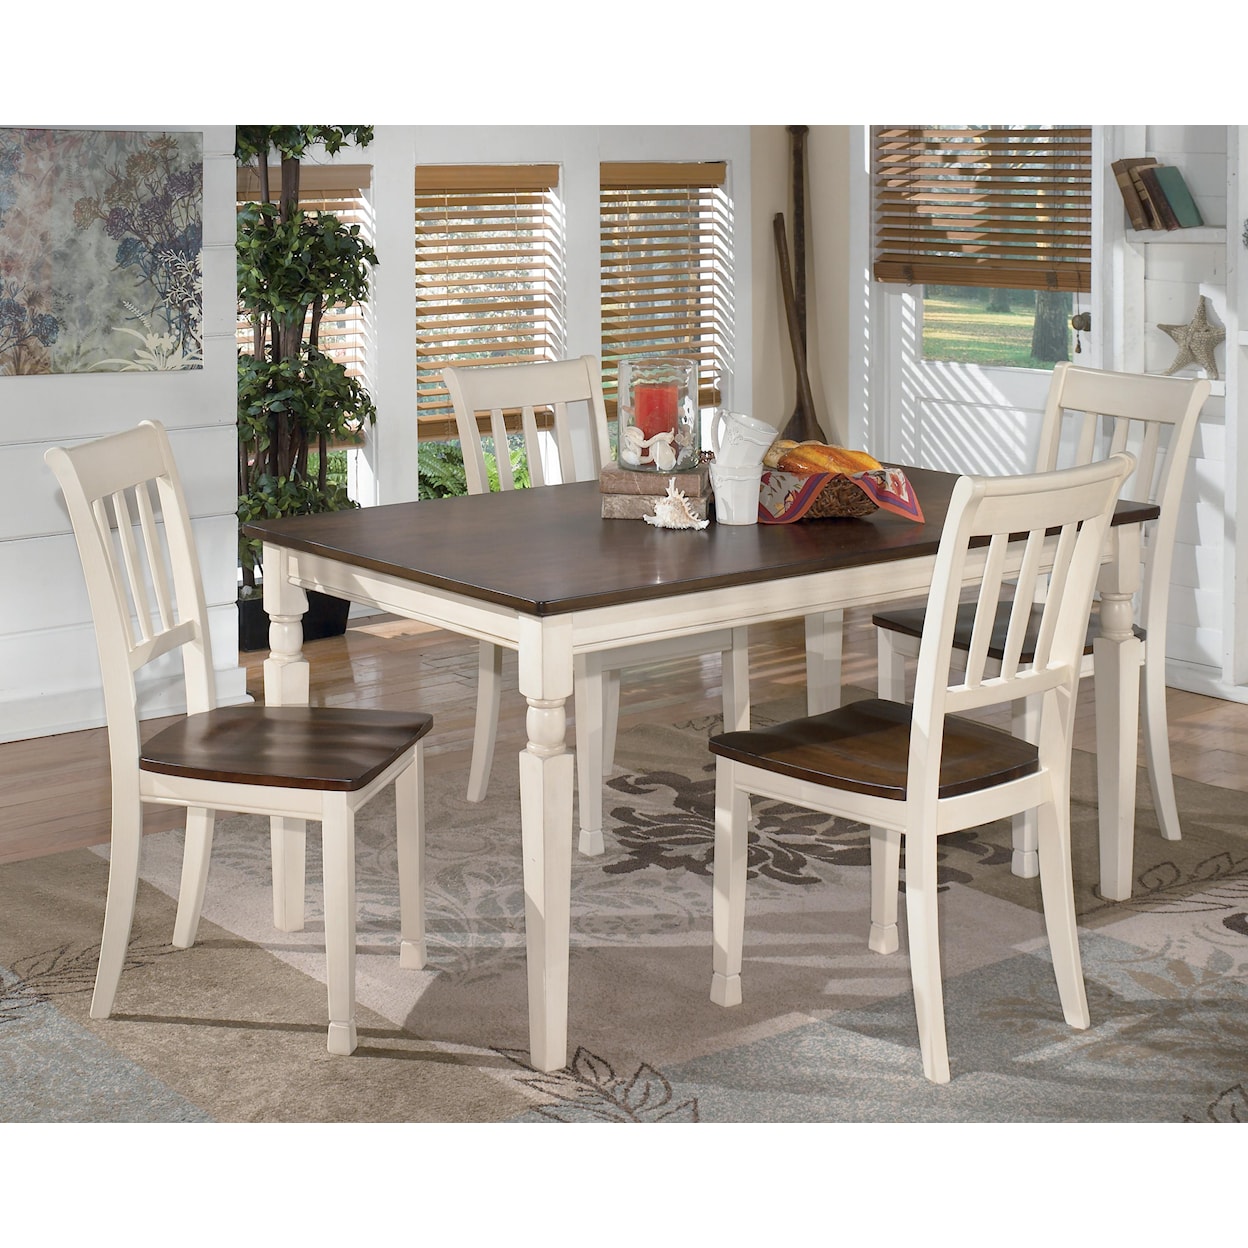 Signature Design by Ashley Whitesburg 5pc Dining Room Group